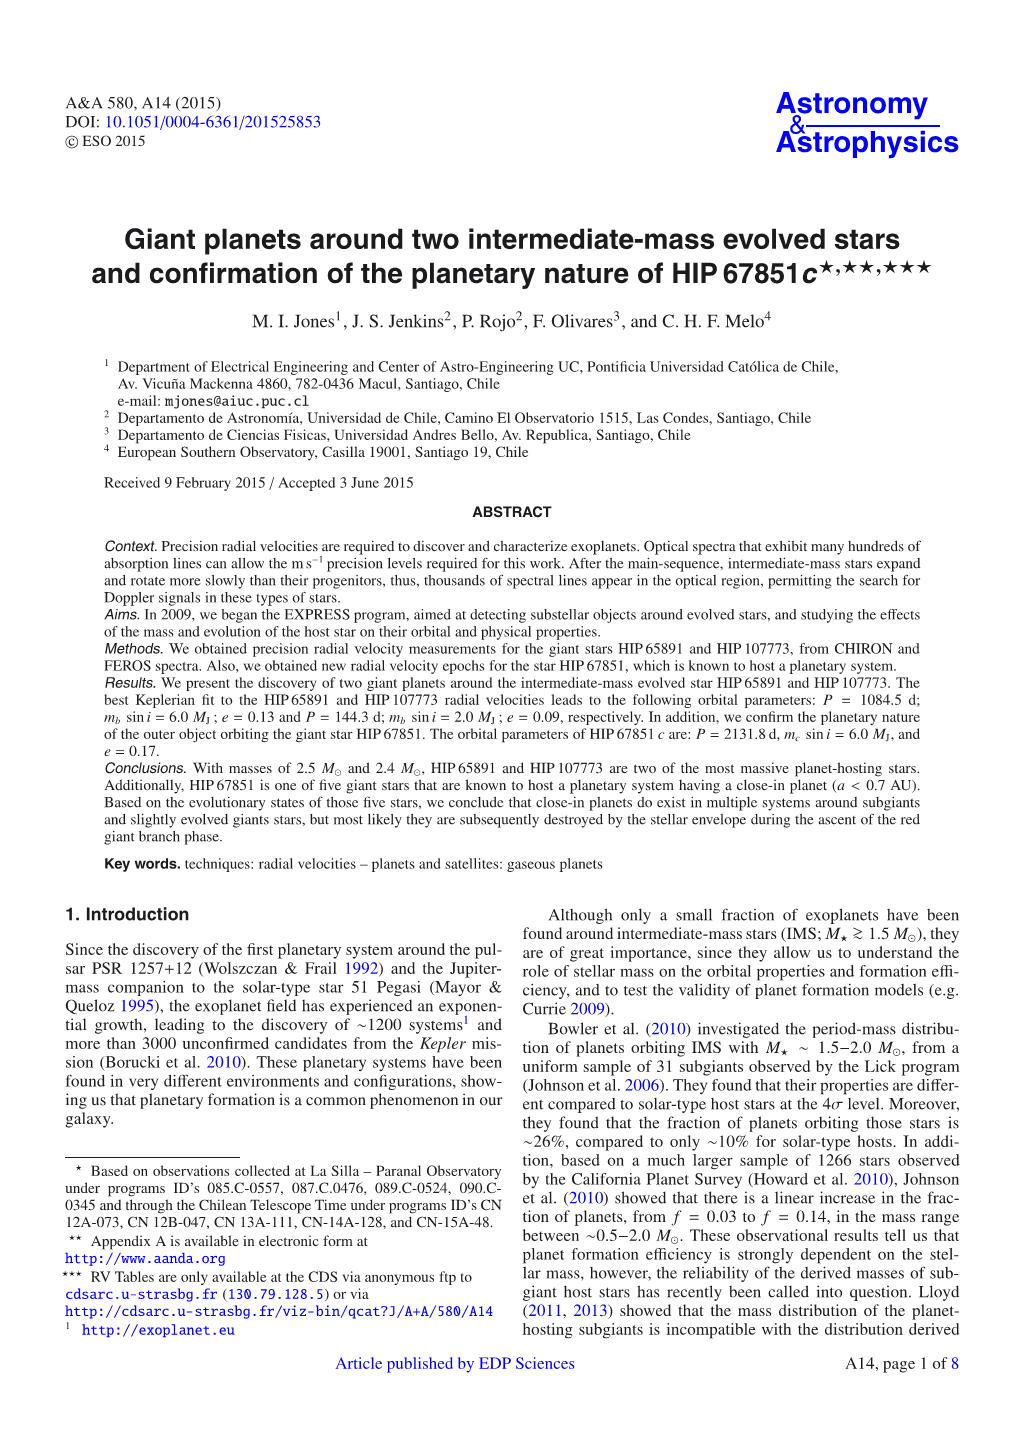 Giant Planets Around Two Intermediate-Mass Evolved Stars and Conﬁrmation of the Planetary Nature of HIP 67851C�,��,�